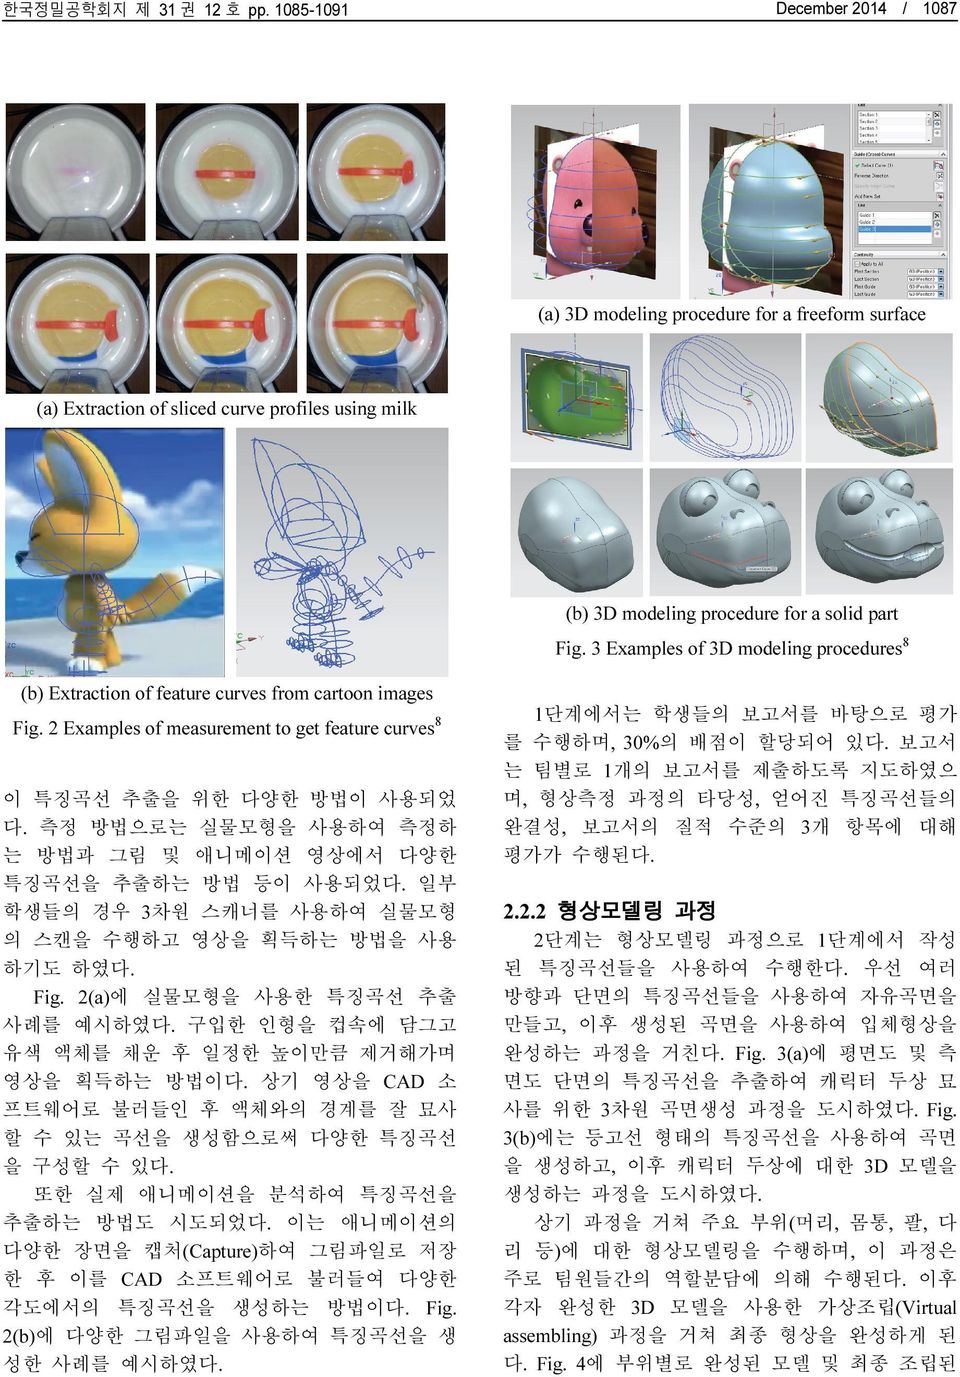 3 Examples of 3D modeling procedures8 (b) Extraction of feature curves from cartoon images Fig. 2 Examples of measurement to get feature curves8 이 특징곡선 추출을 위한 다양한 방법이 사용되었 다.